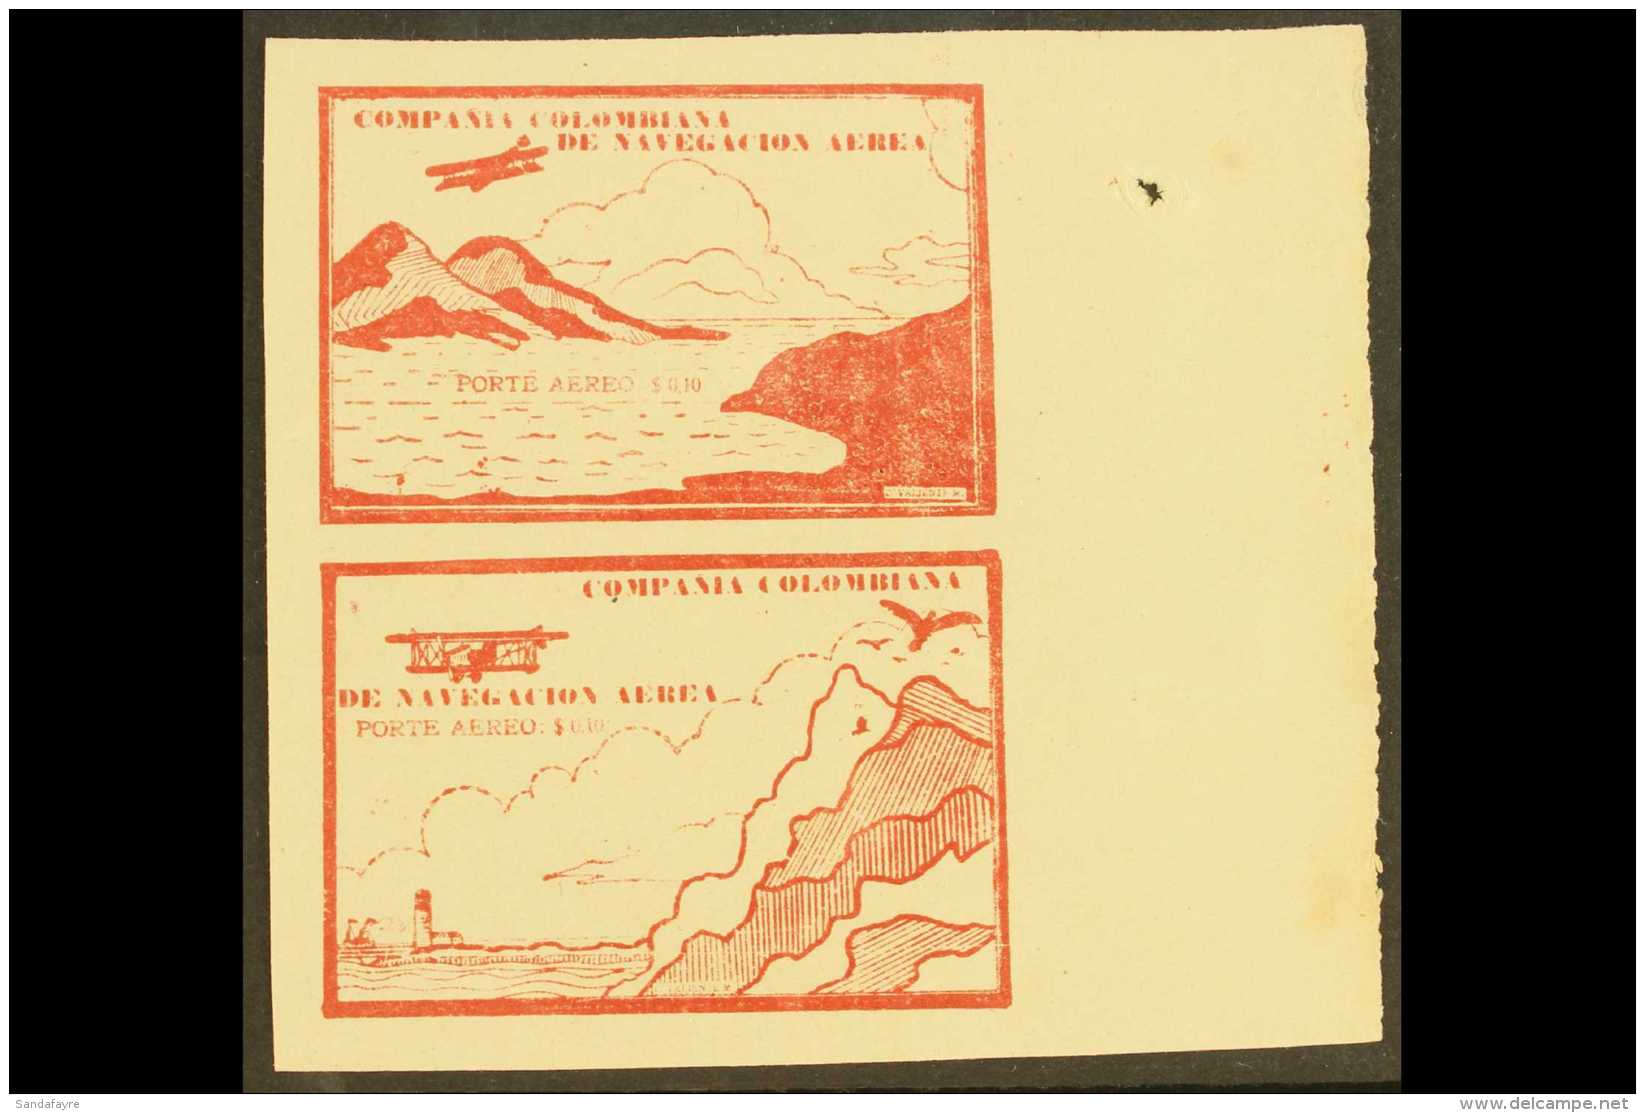 PRIVATE AIRS - COMPANIA COLOMBIANA DE NAVEGACION AREA  1920 (Oct) 10c Brown-red "Sea And Mountains" And "Cliffs... - Colombie